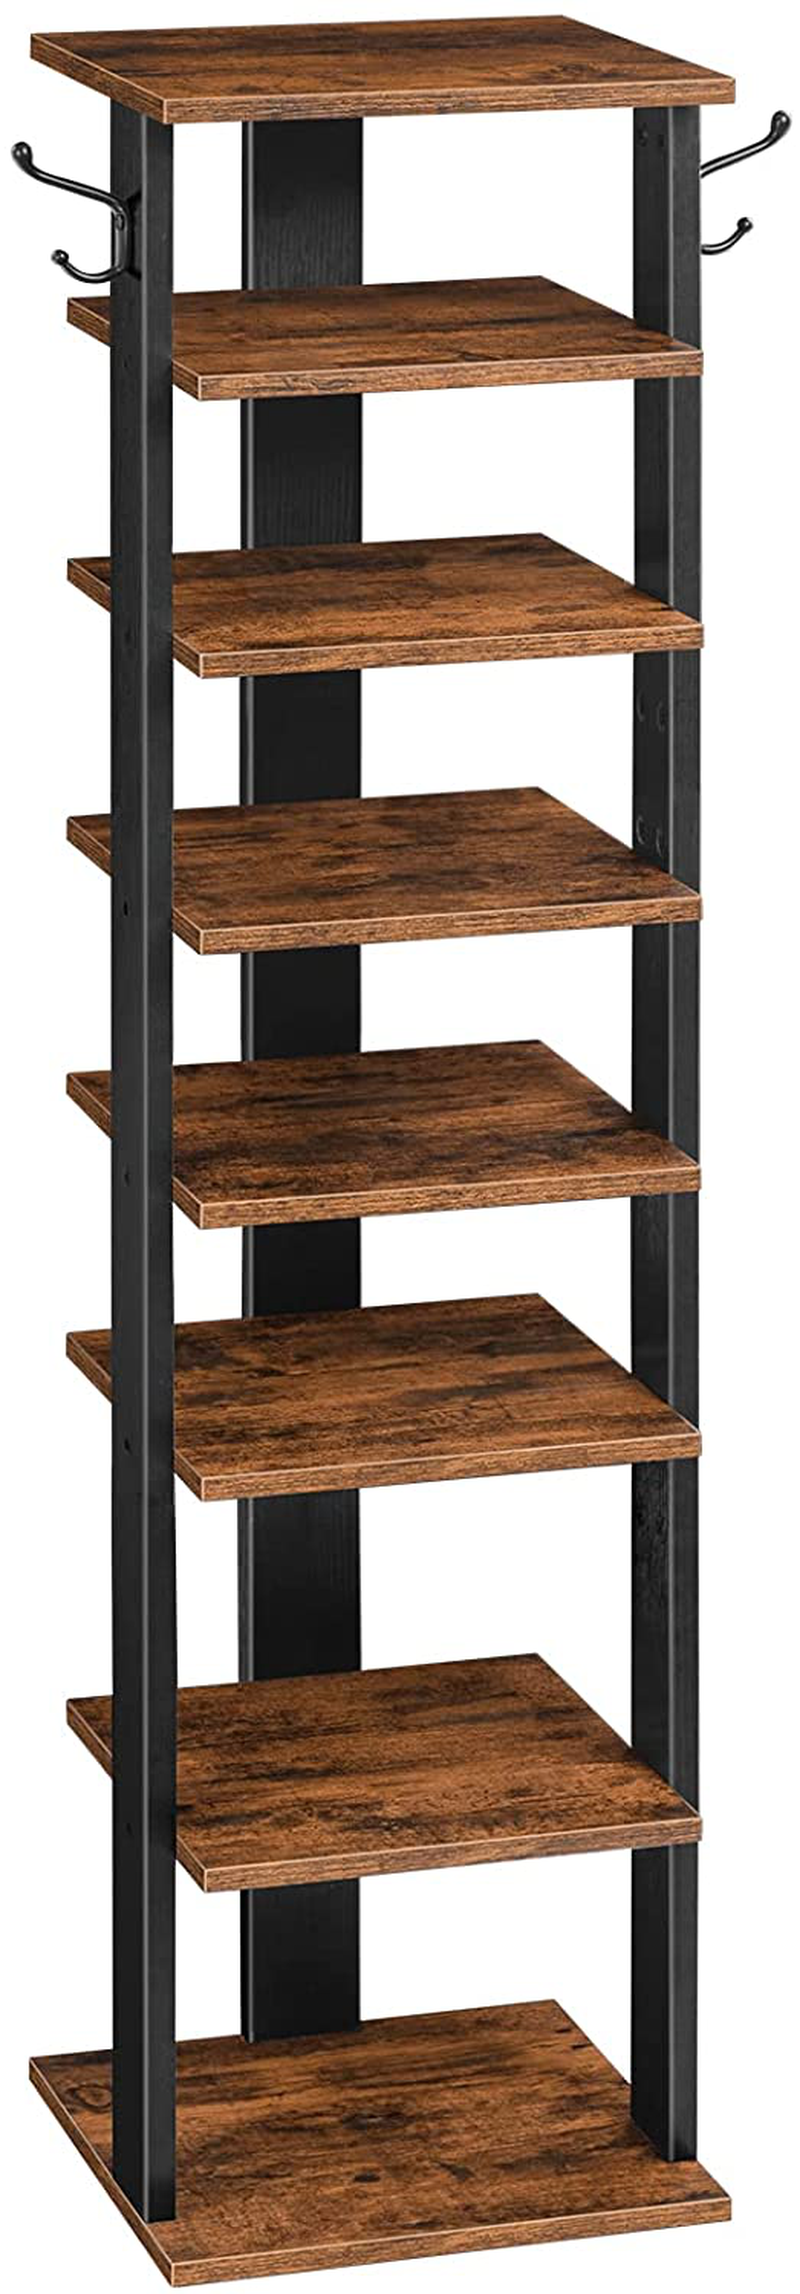 HOOBRO Vertical Shoe Rack, 8 Tier Shoe Storage Organizer with Hooks, Narrow Shoe Rack for 8 Pairs, Space Saving, Stable and Strong, for Entryway, Living Room, Bedroom, Rustic Brown BF07XJ01 Furniture > Cabinets & Storage > Armoires & Wardrobes HOOBRO   